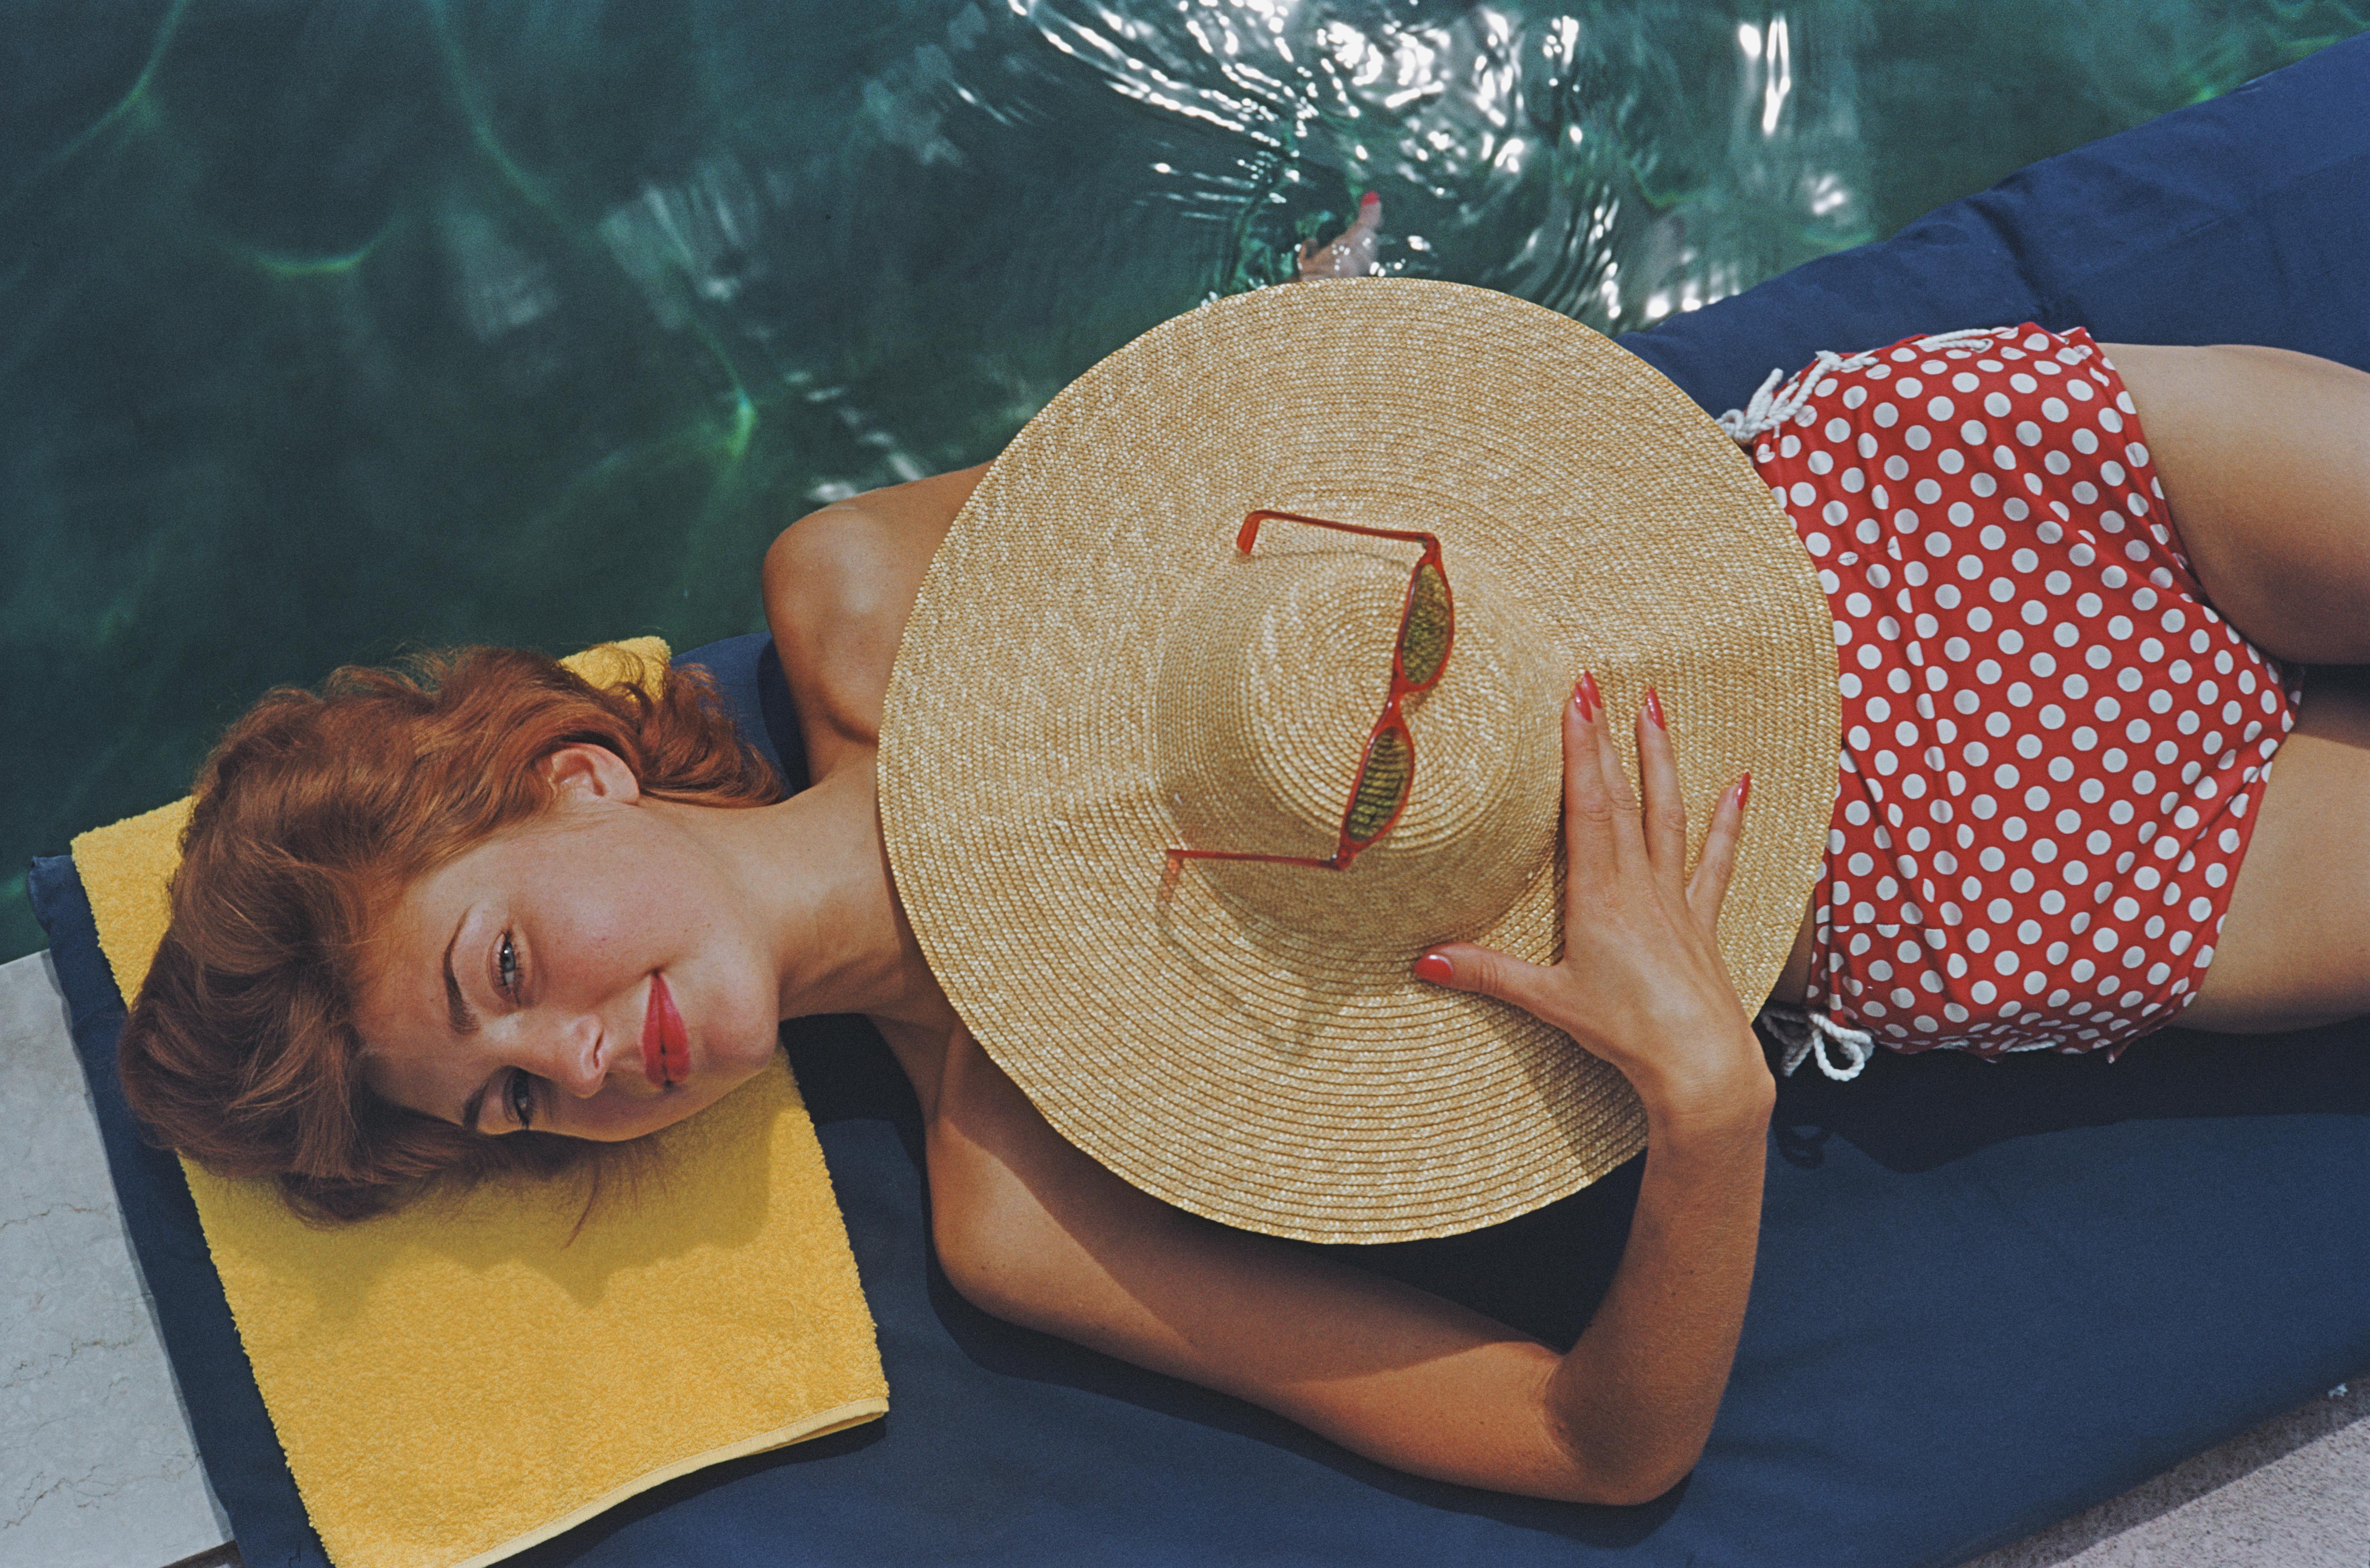 Slim Aarons
Coral Beach, Bermuda, 1977. 
C print
estate edition of 150
Estate stamped and hand numbered edition of 150 with certificate of authenticity from the estate.   

Lilian Hanson, sunbathing by a pool at the Brgenstock Resort in Canton